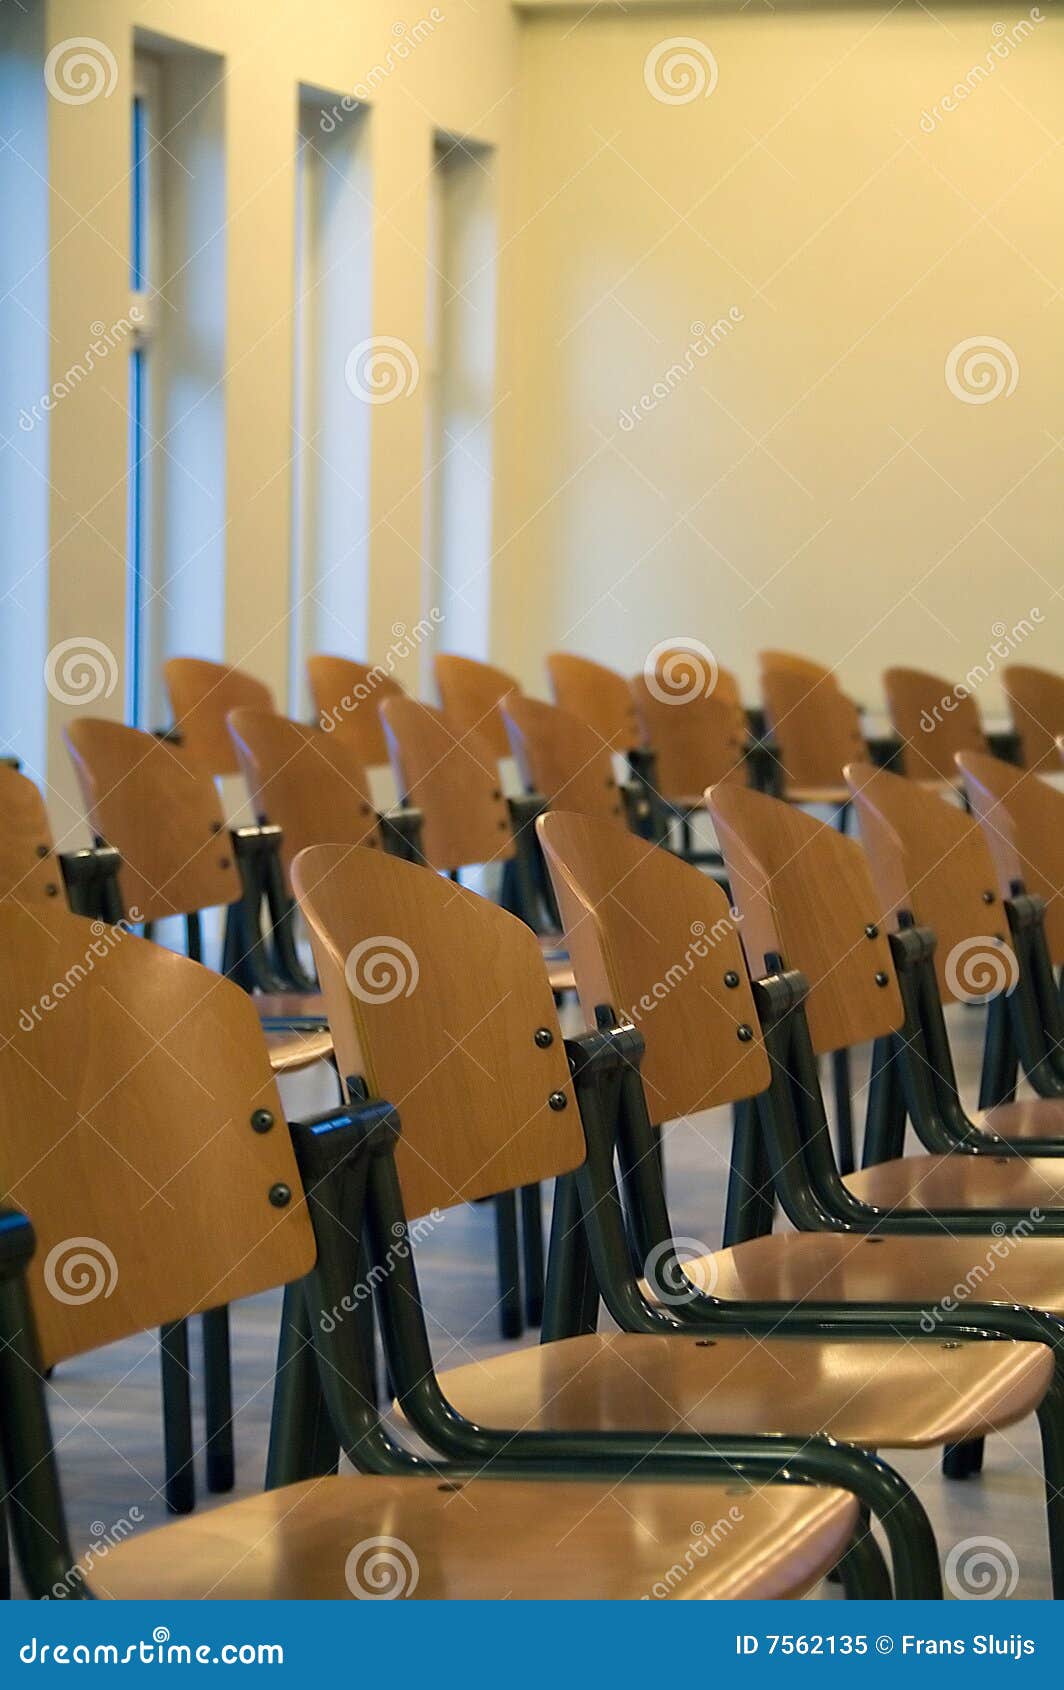 rows of wooden chairs